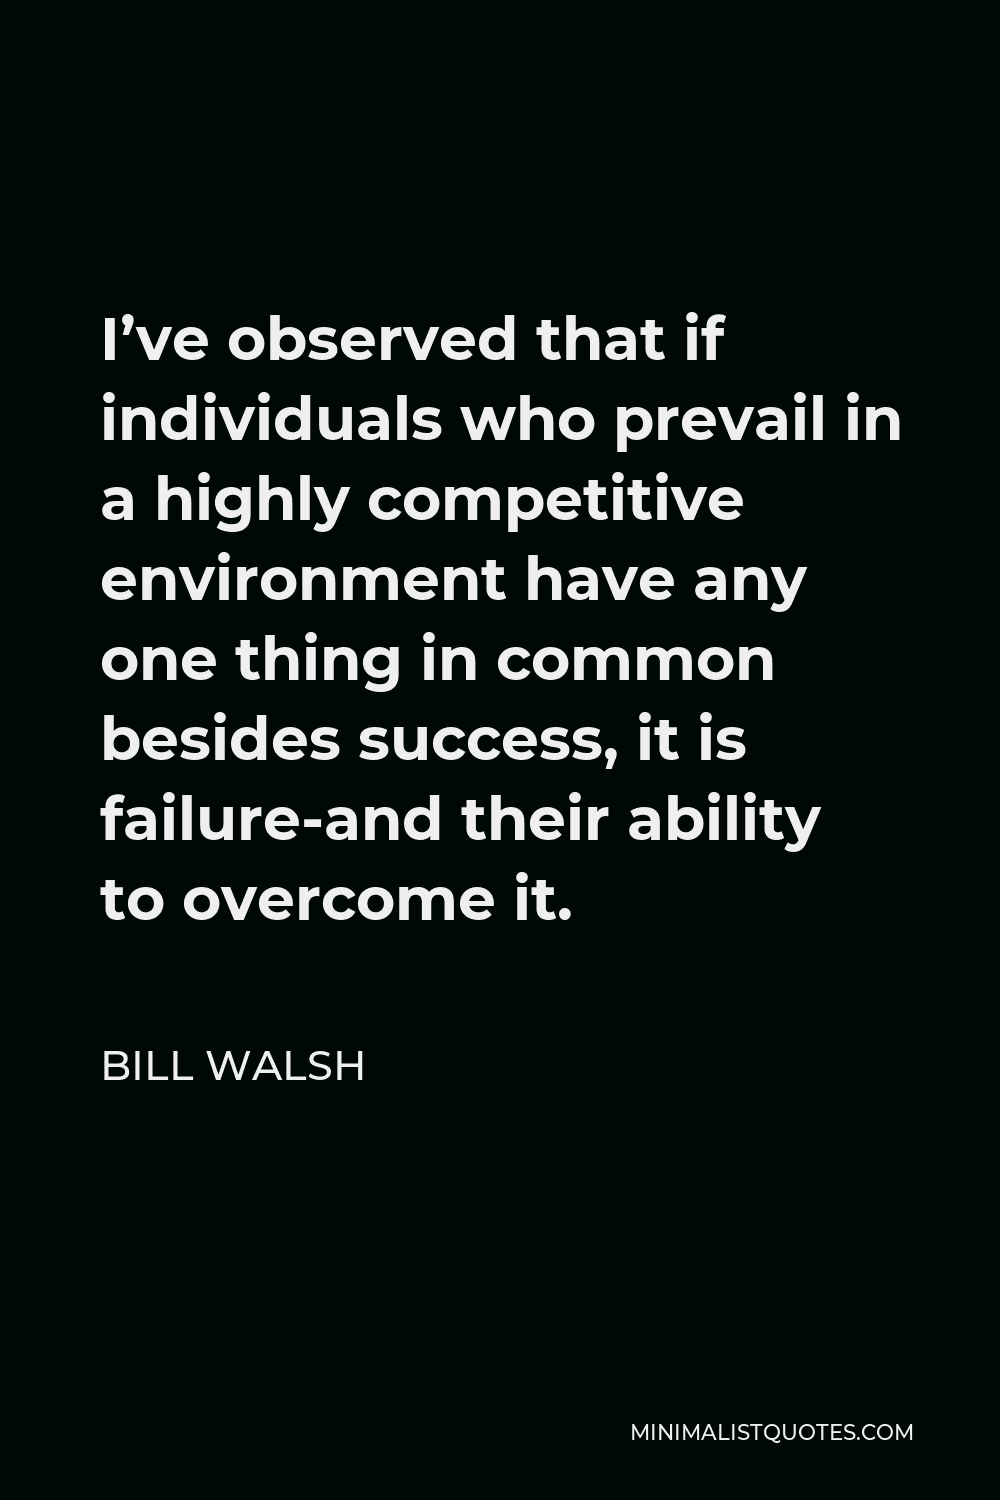 Bill Walsh Quote - I’ve observed that if individuals who prevail in a highly competitive environment have any one thing in common besides success, it is failure-and their ability to overcome it.